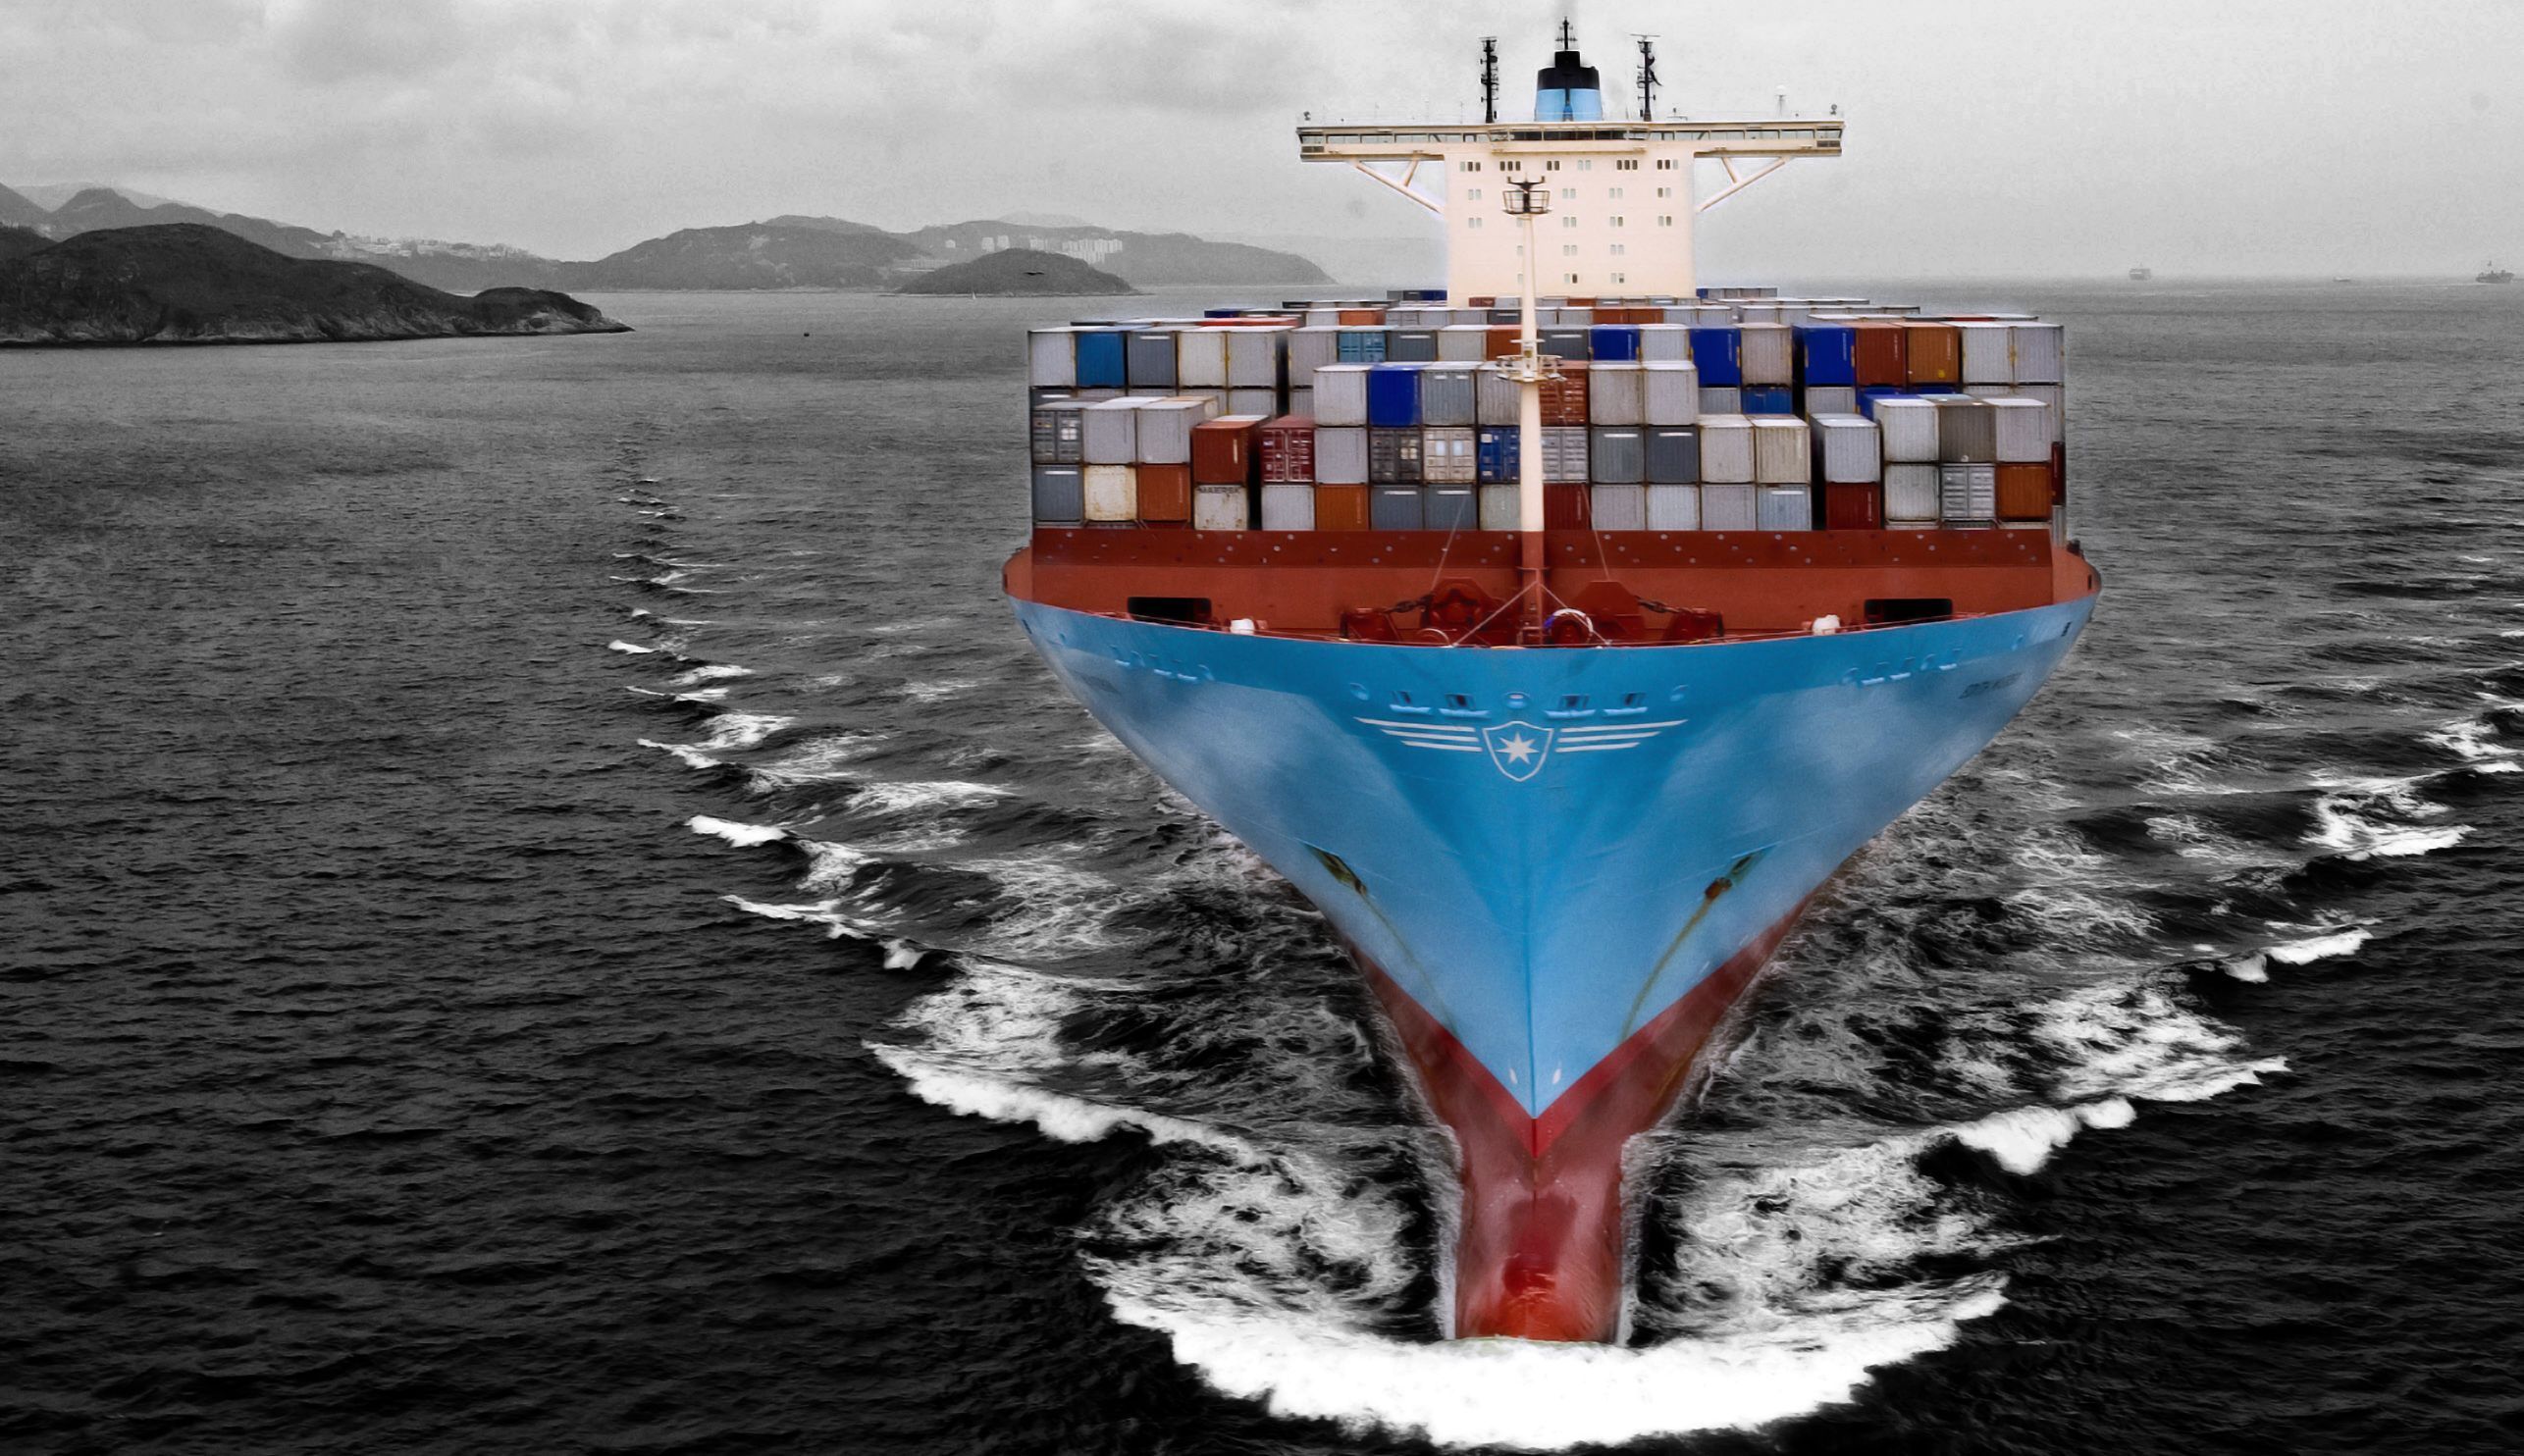 Container ship wallpaper hd alternating